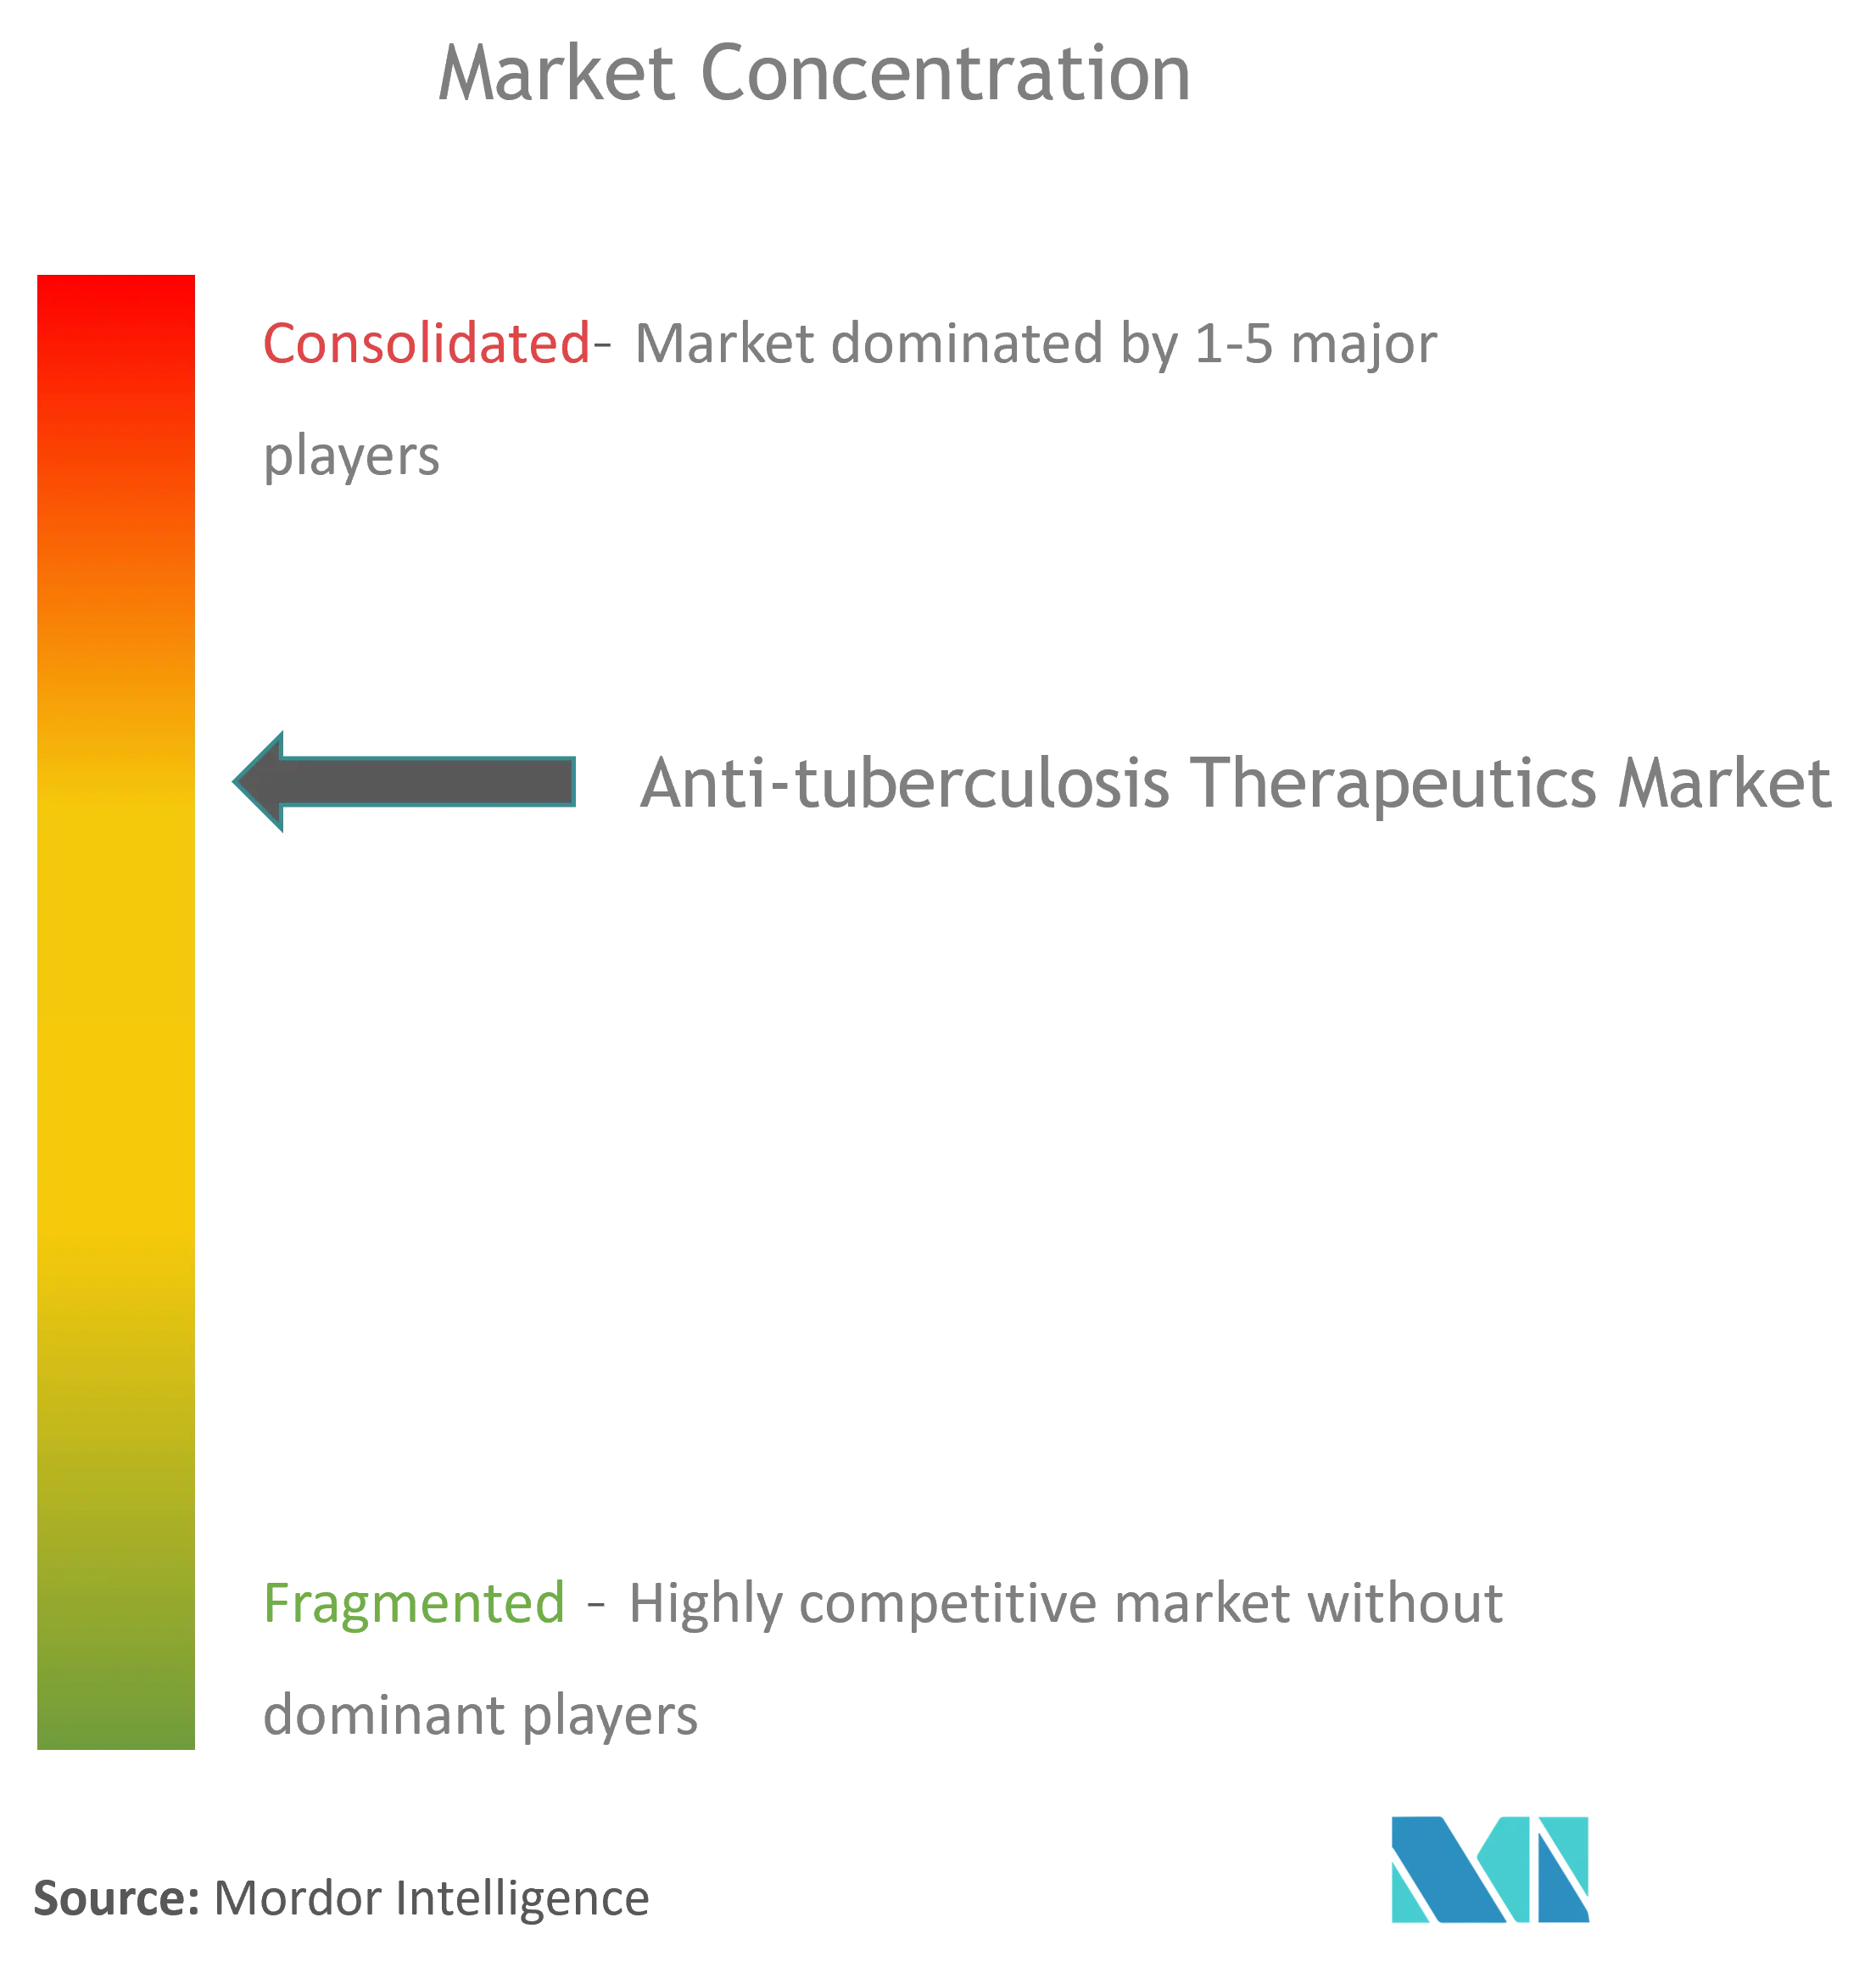 Global Anti-tuberculosis Therapeutics Market Concentration